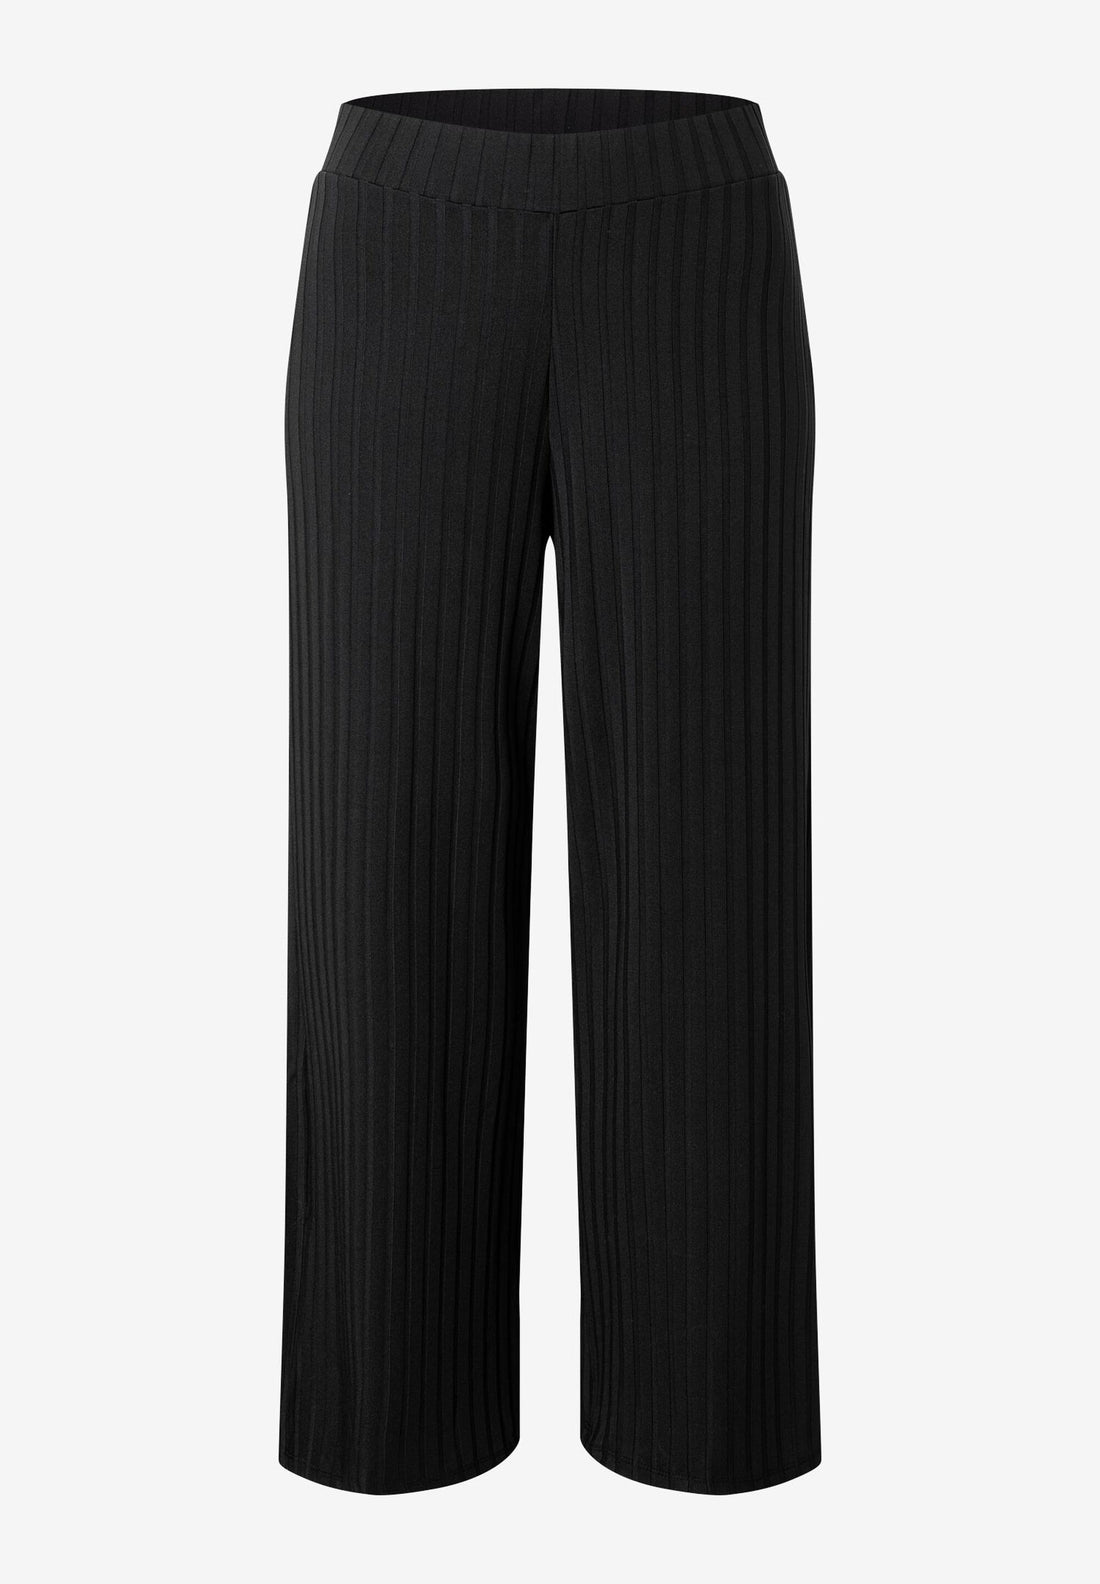 Black Cropped Culotte Style Trousers_02